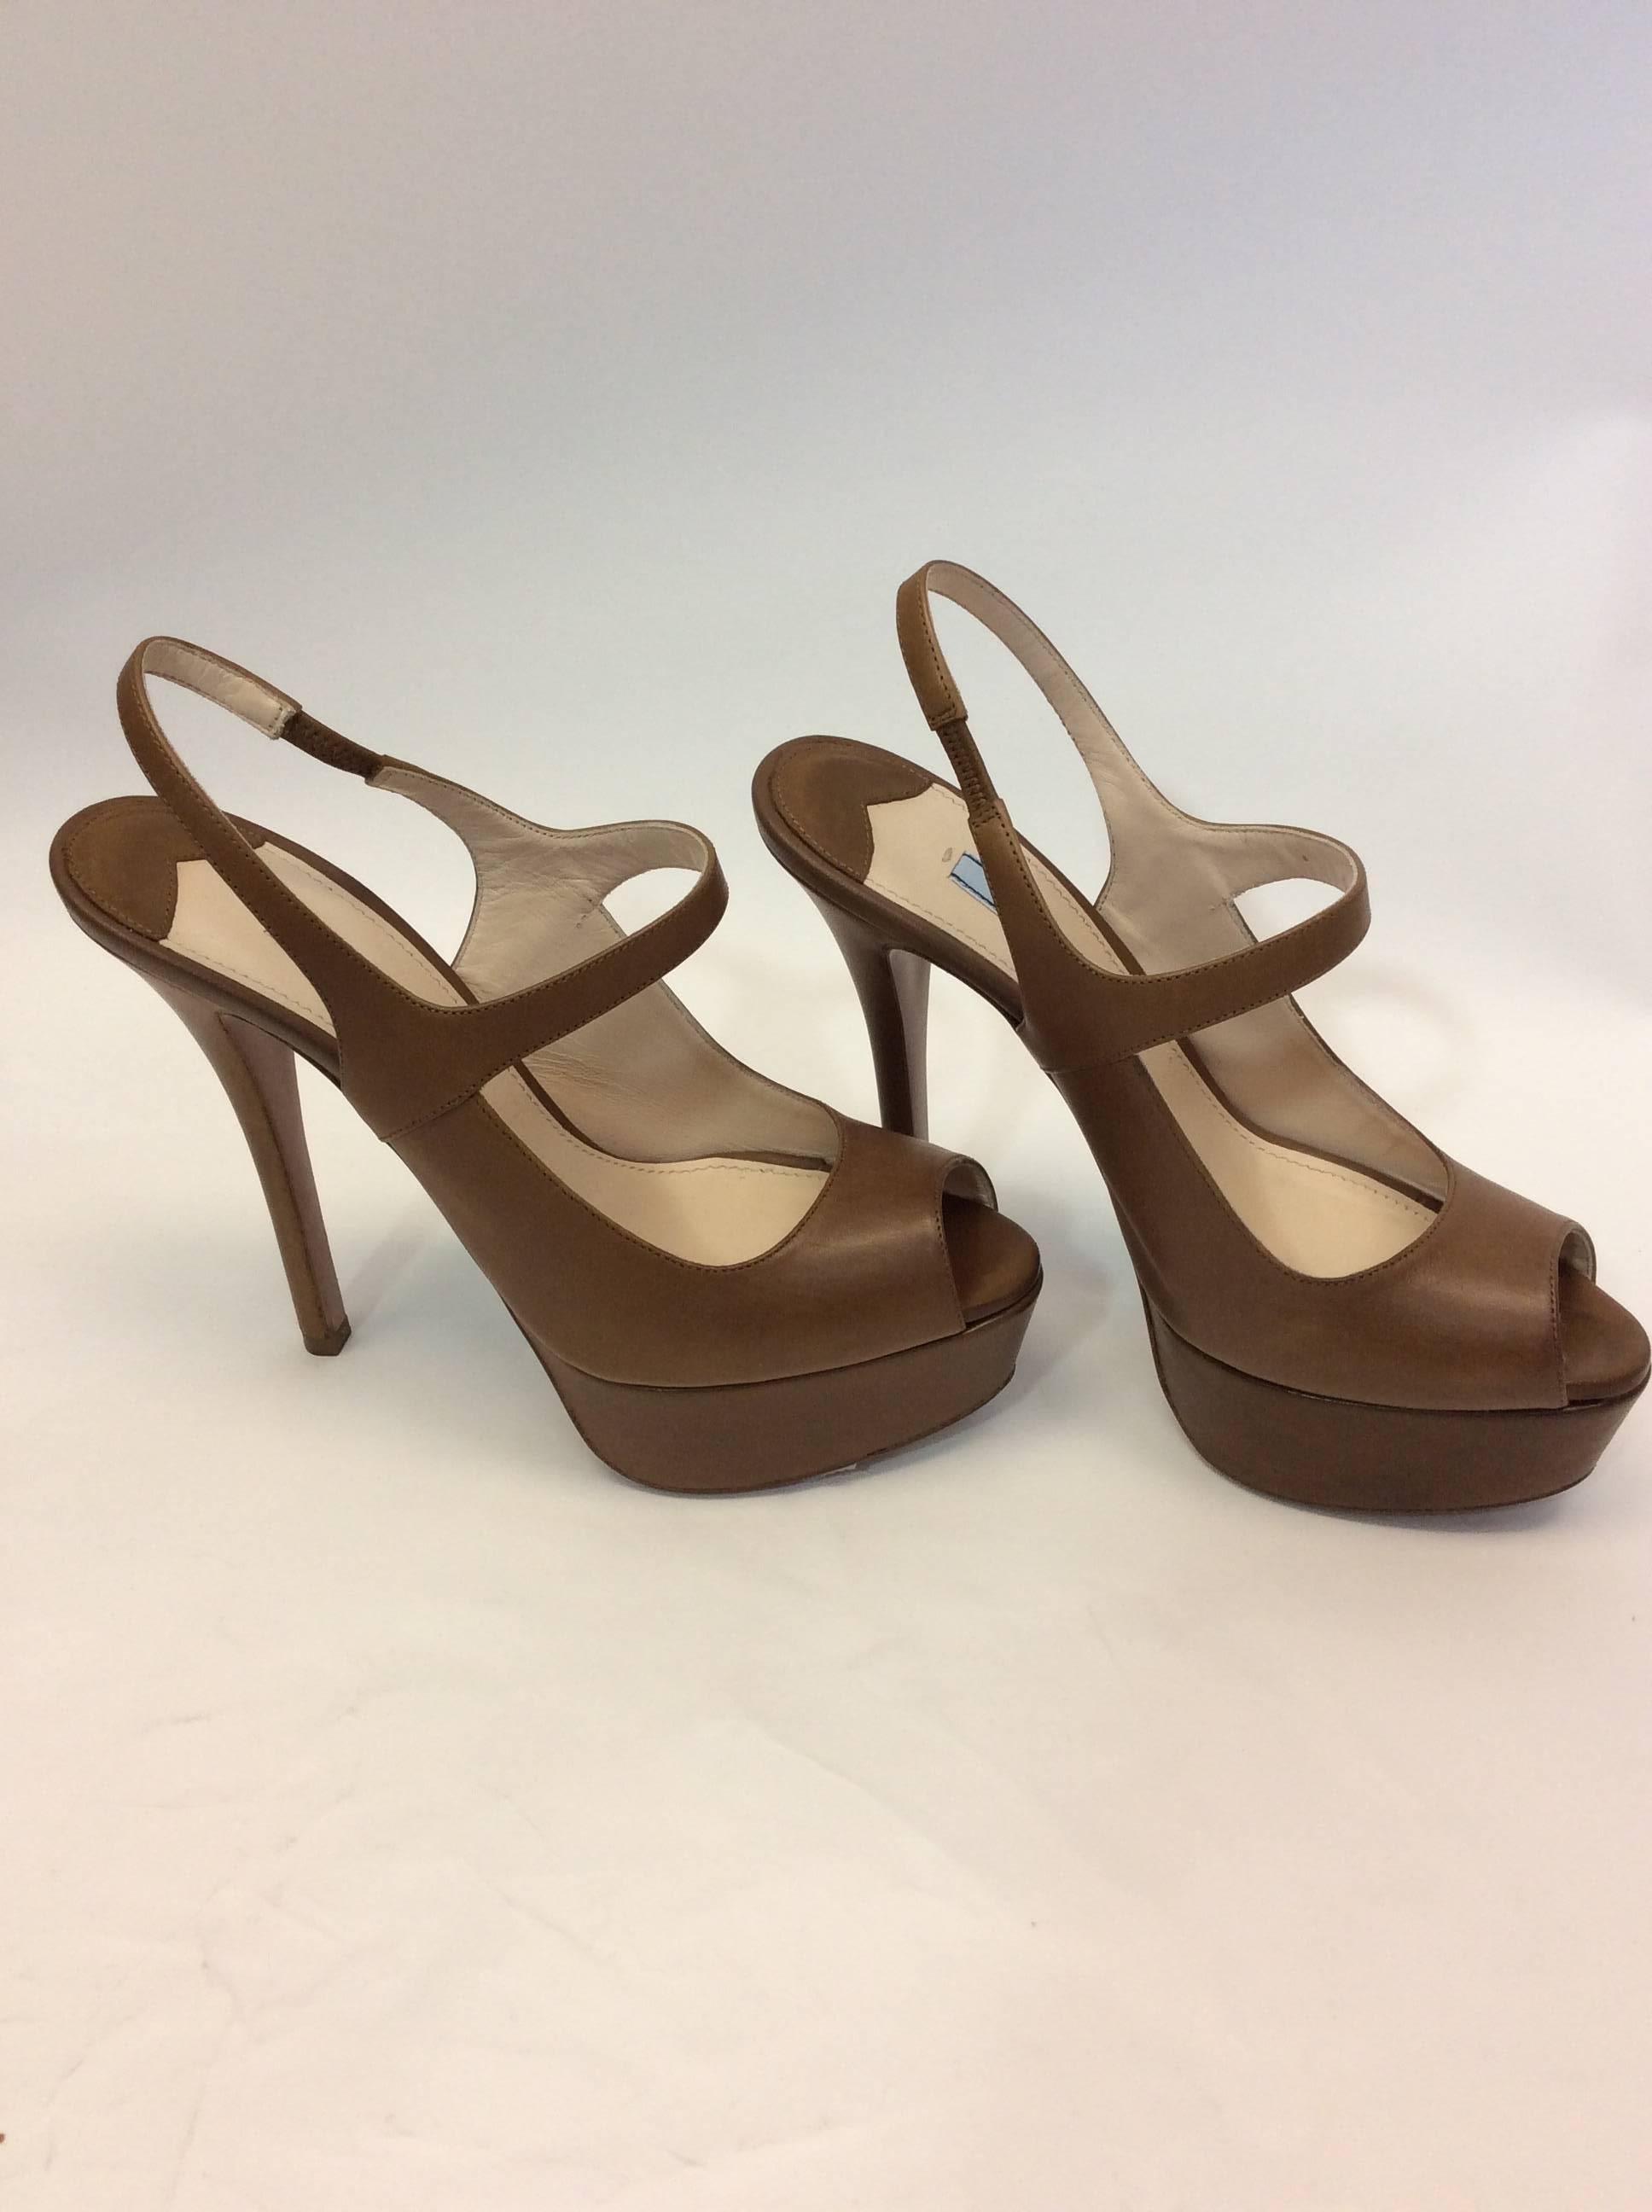 Prada Taupe Ankle Strap Slingback Pumps In Excellent Condition For Sale In Narberth, PA